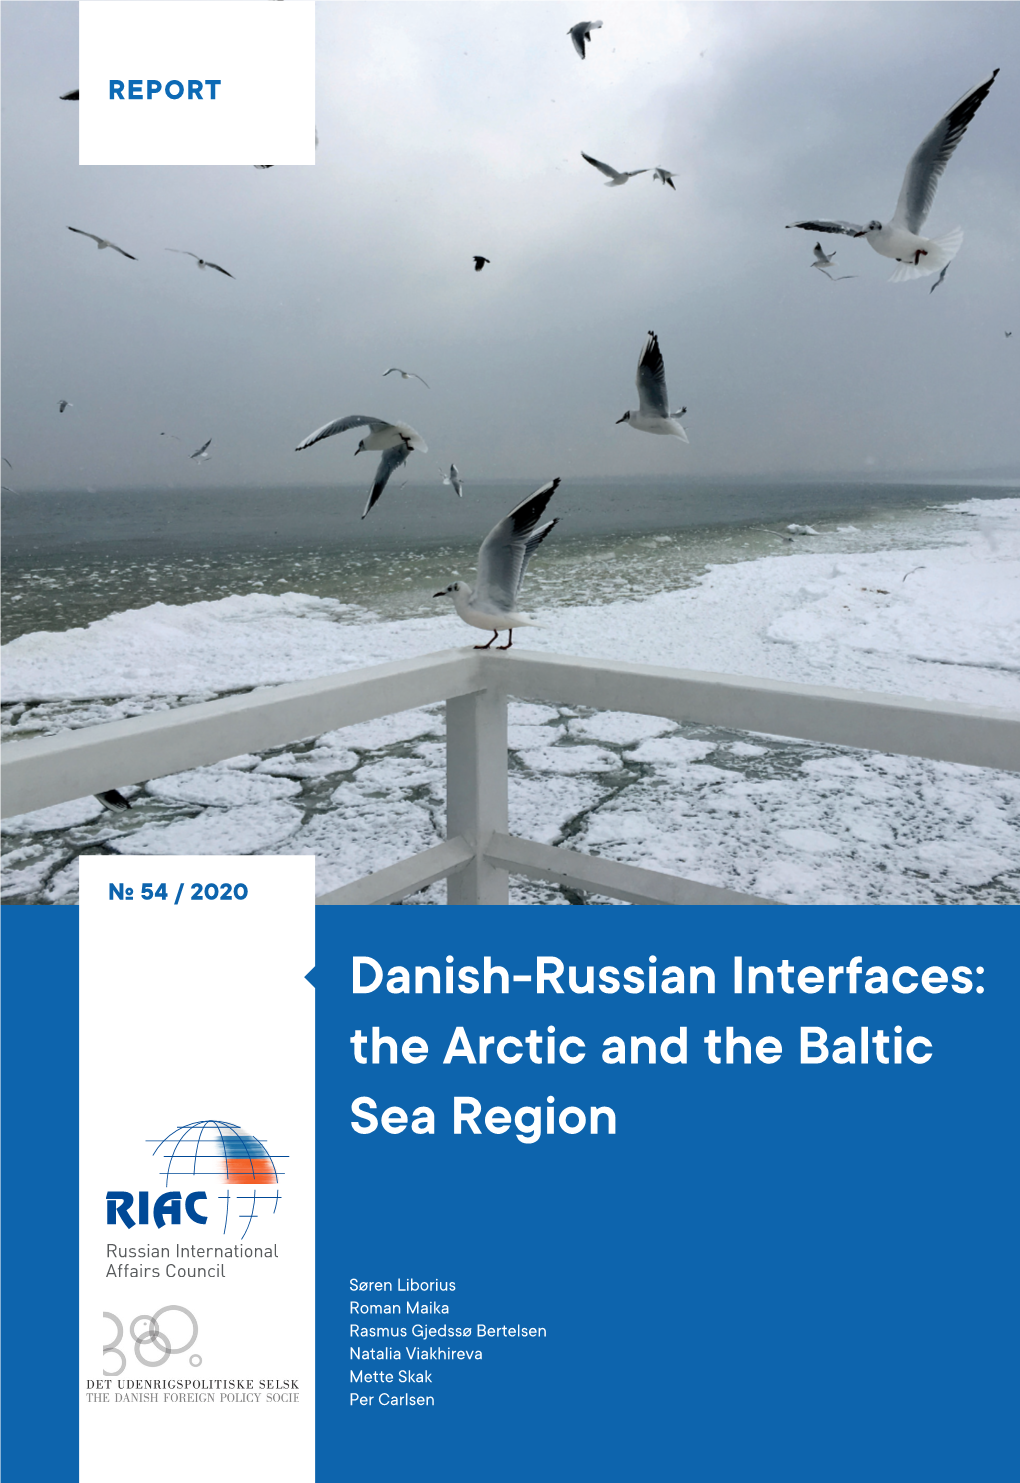 Danish-Russian Interfaces: the Arctic and the Baltic Sea Region